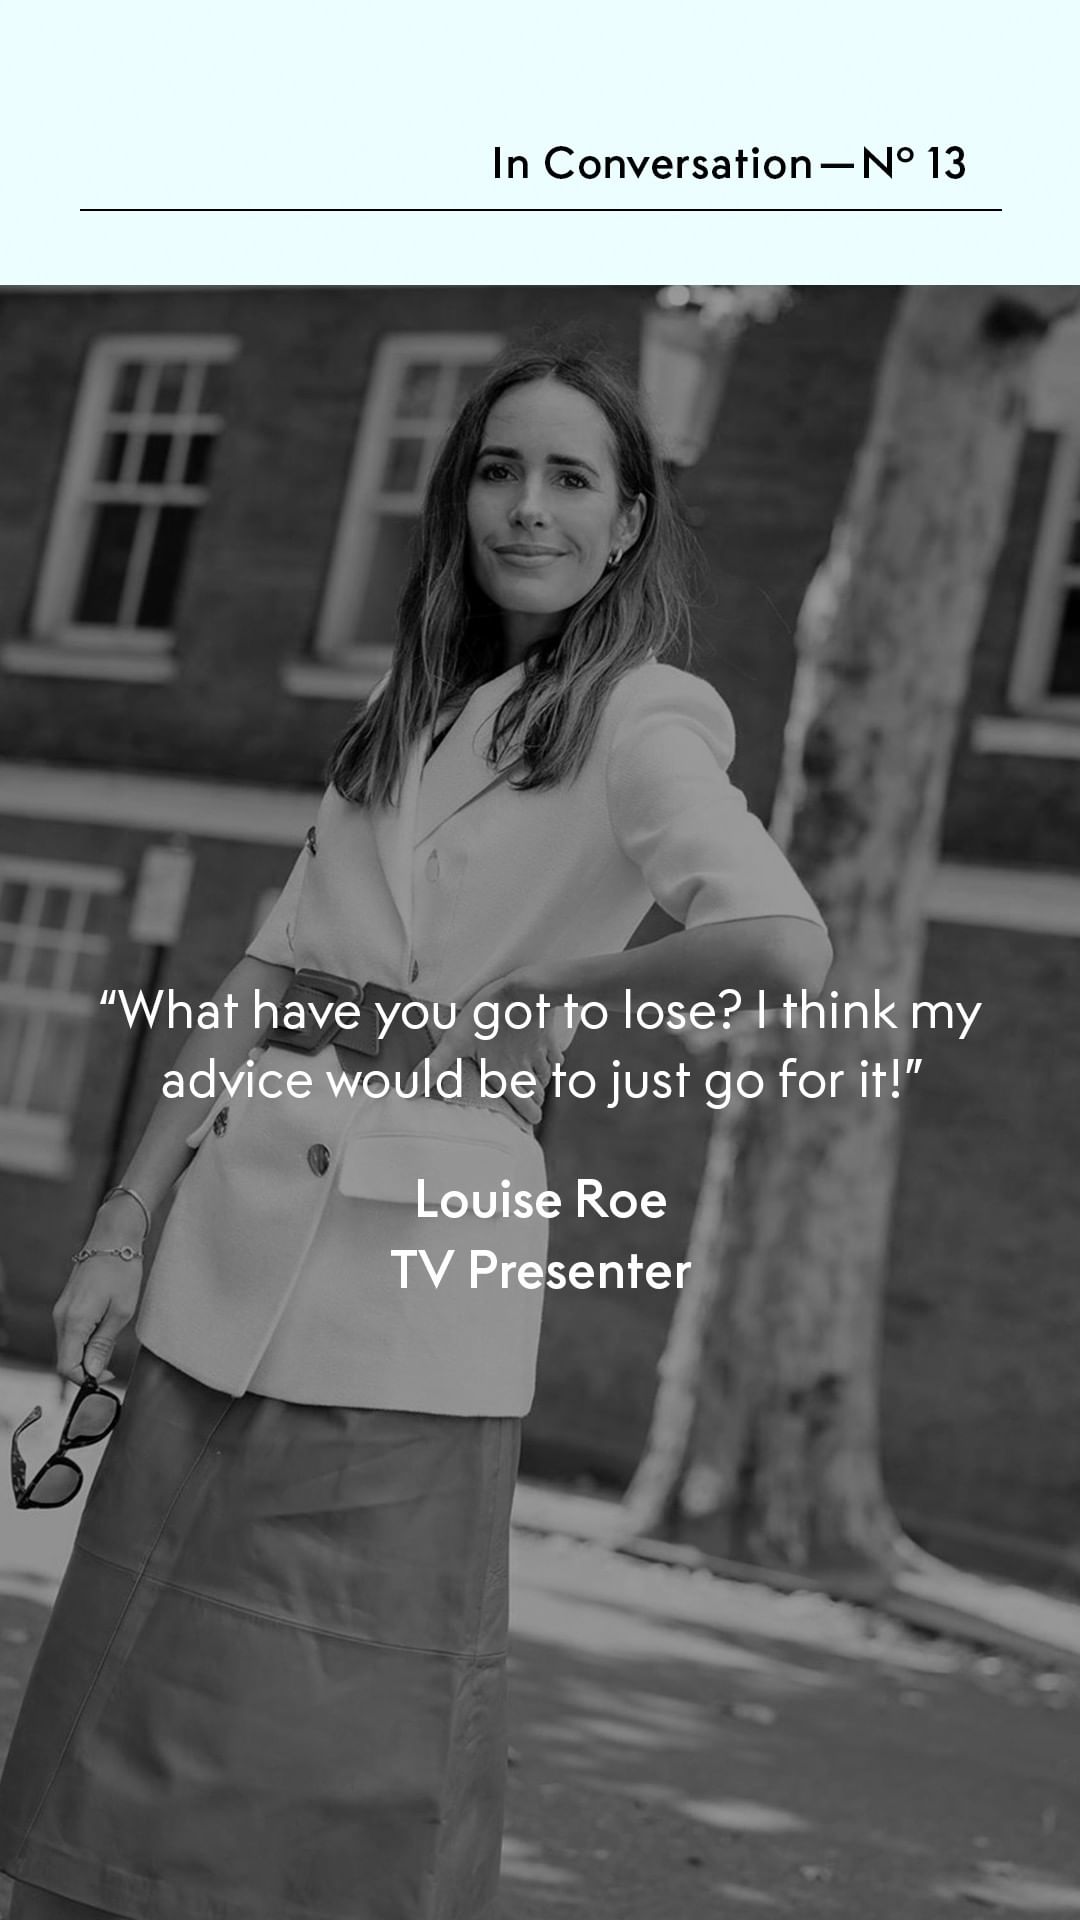 THE OUTNET - We enjoyed a catch-up with TV Presenter, writer and so much more, Louise Roe.